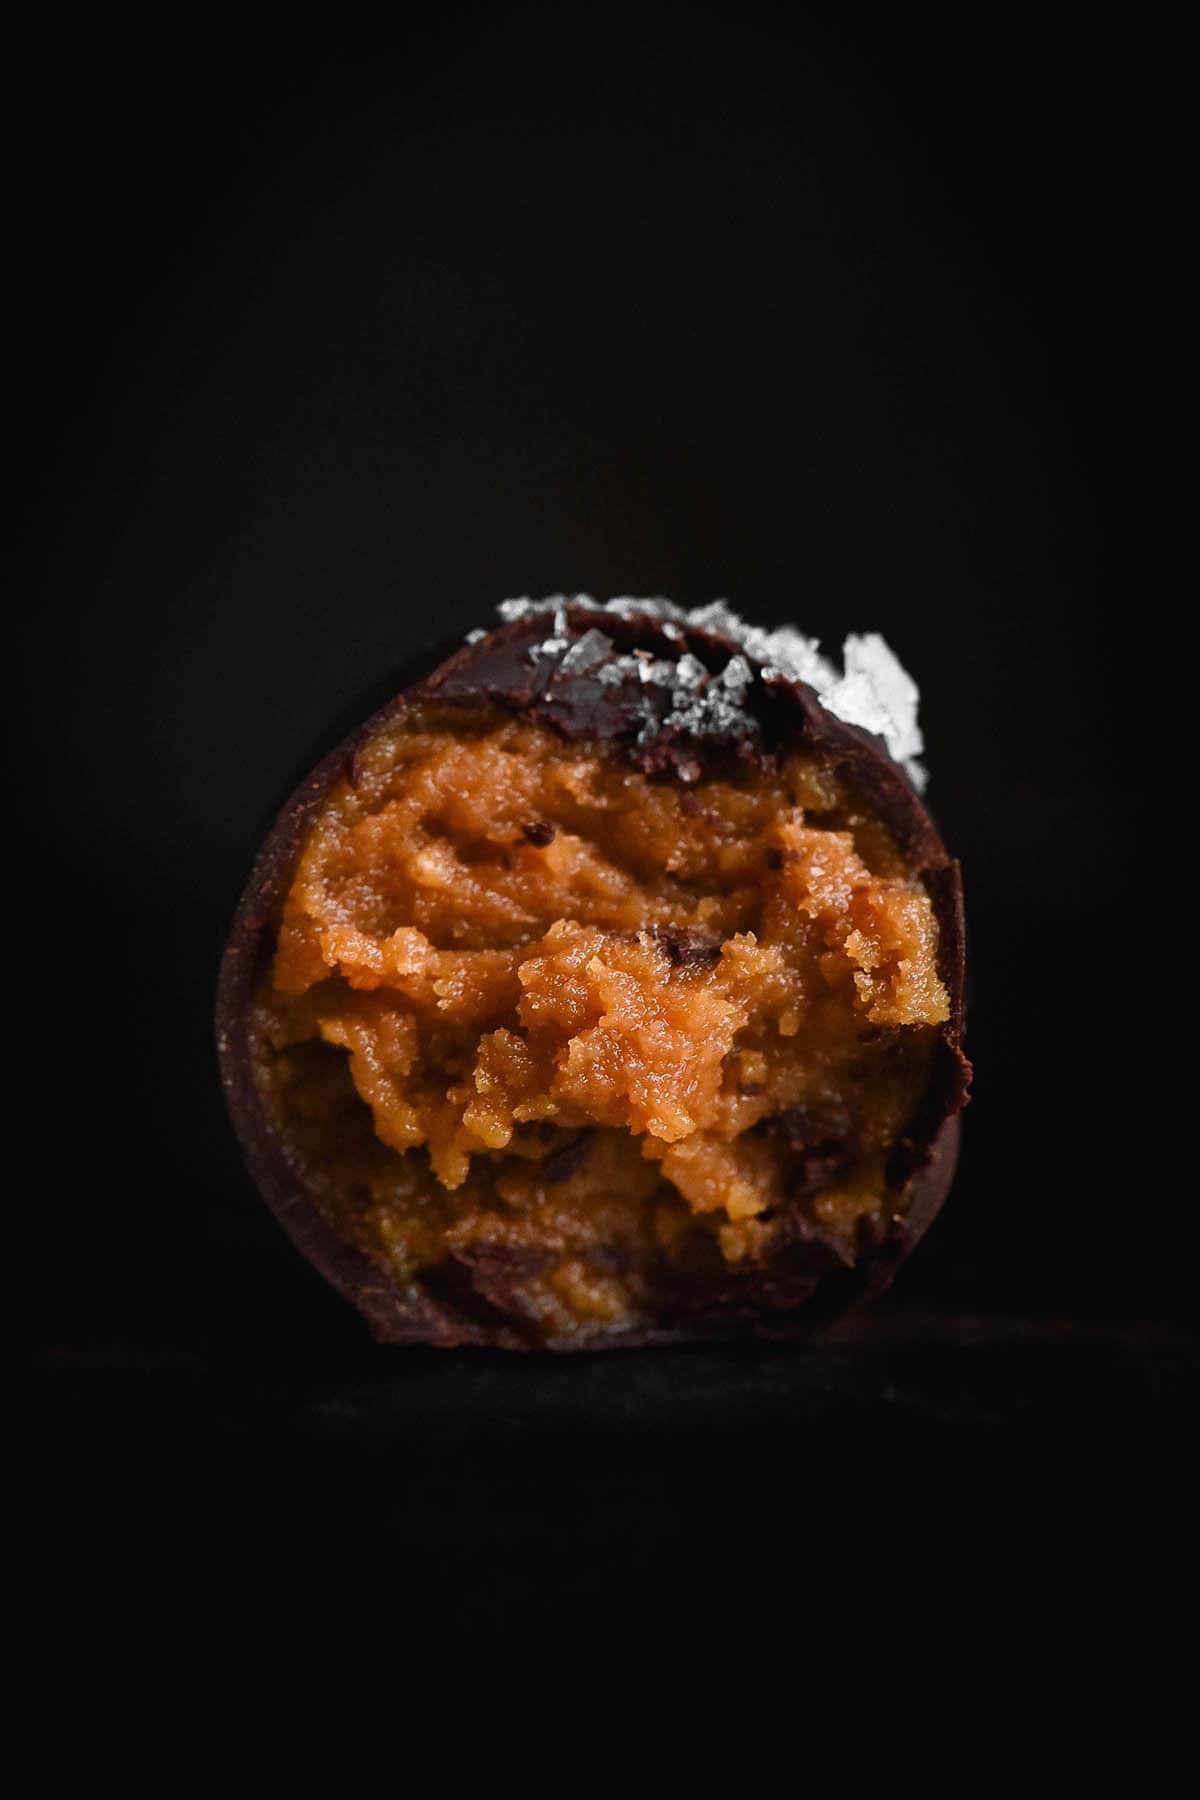 A close up side on image of a peanut butter truffle coated in dark chocolate. A bite has been taken, revealing the peanut butter centre, and sea salt flakes adorn the top. The truffle sits atop a black surface against a black backdrop